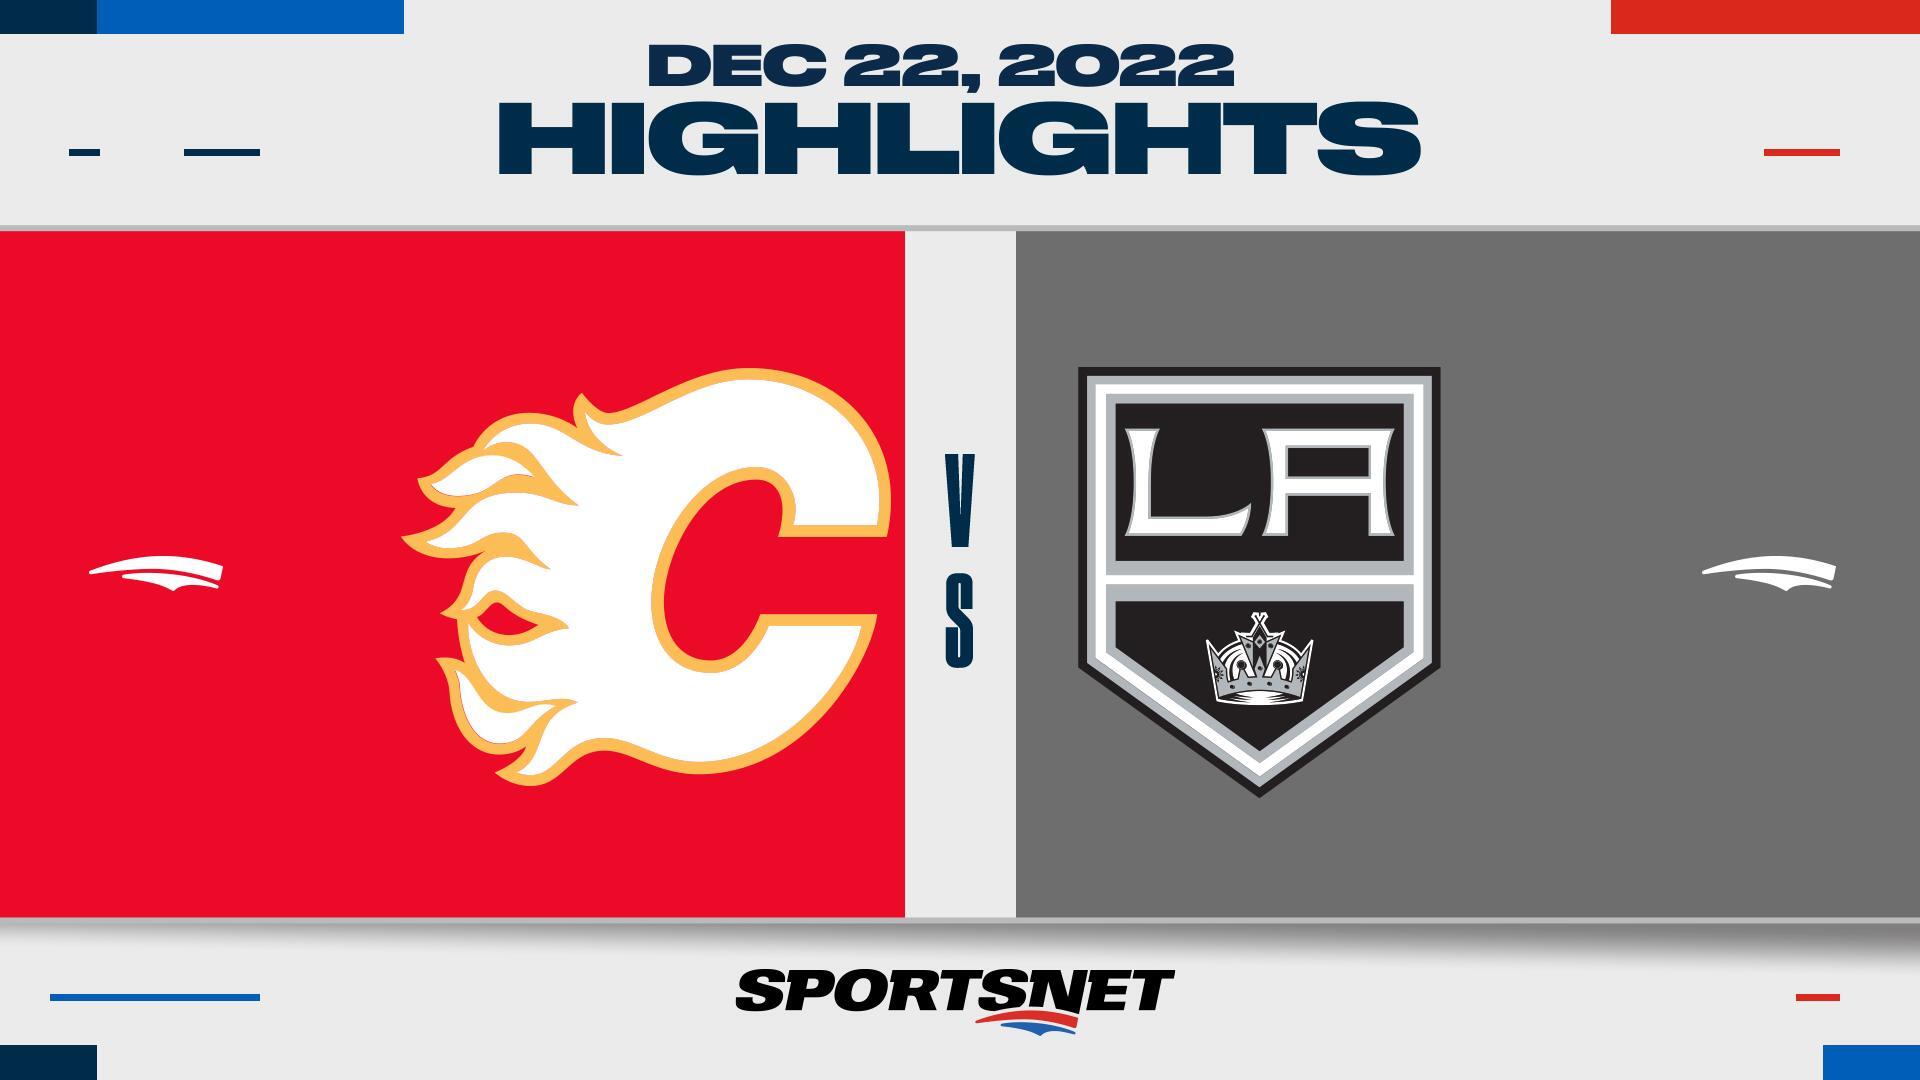 Gryphon Sports Management - Will Jonathan Huberdeau bounce back after a  disappointing first year with the Calgary Flames? #newyork #sportsbetting  #nhledits #ncaa #puck #montrealcanadiens #bostonbruins #toronto  #nhldiscussion #hockeyfamily #hockeyseason